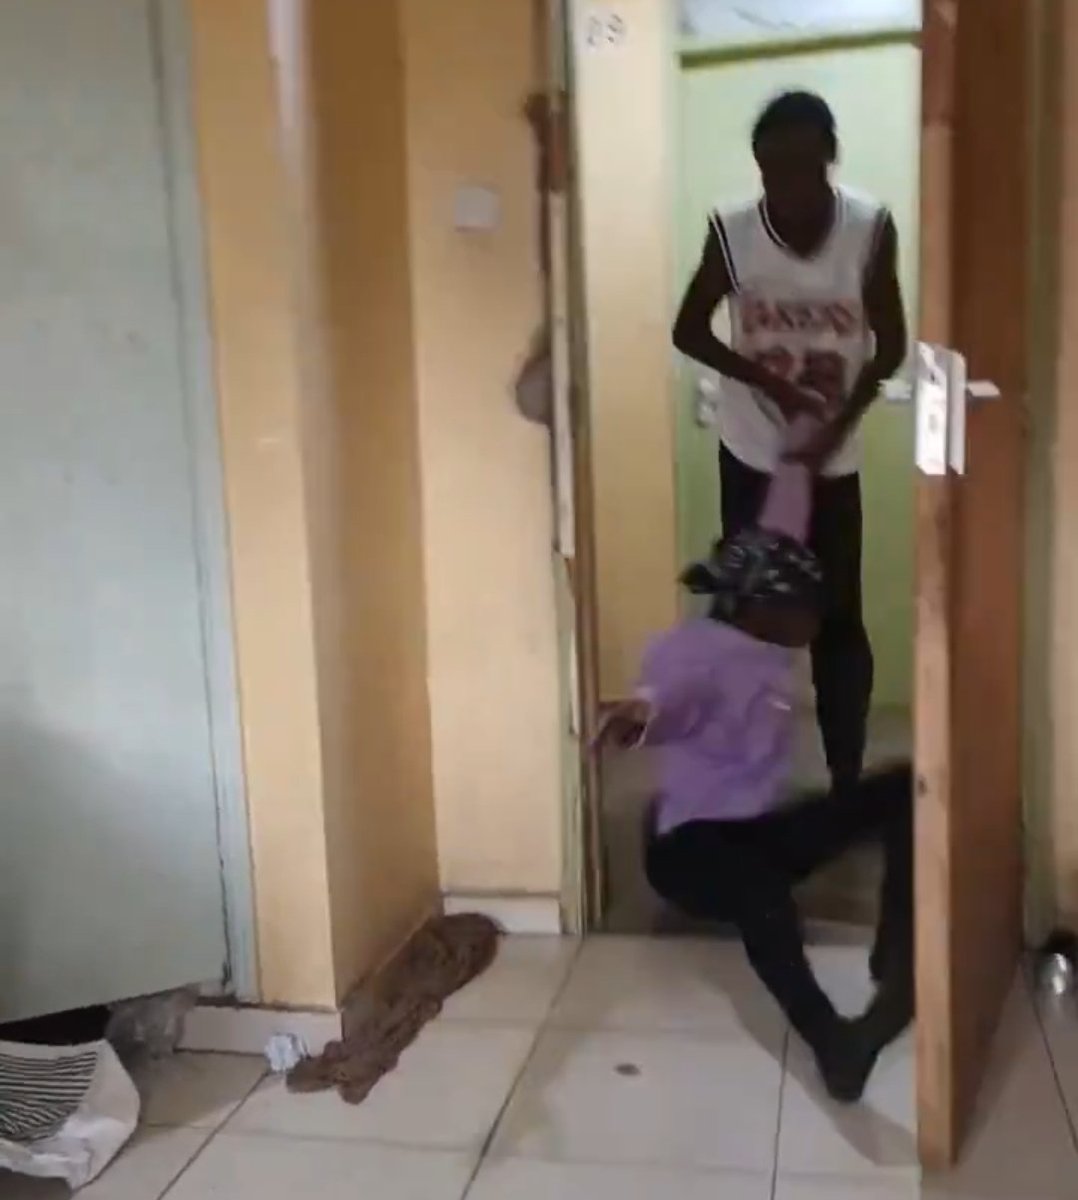 Happened Last night at Maasai Mara University. The lady who is a second year wants the boy who is a first year by Force. Watch👇